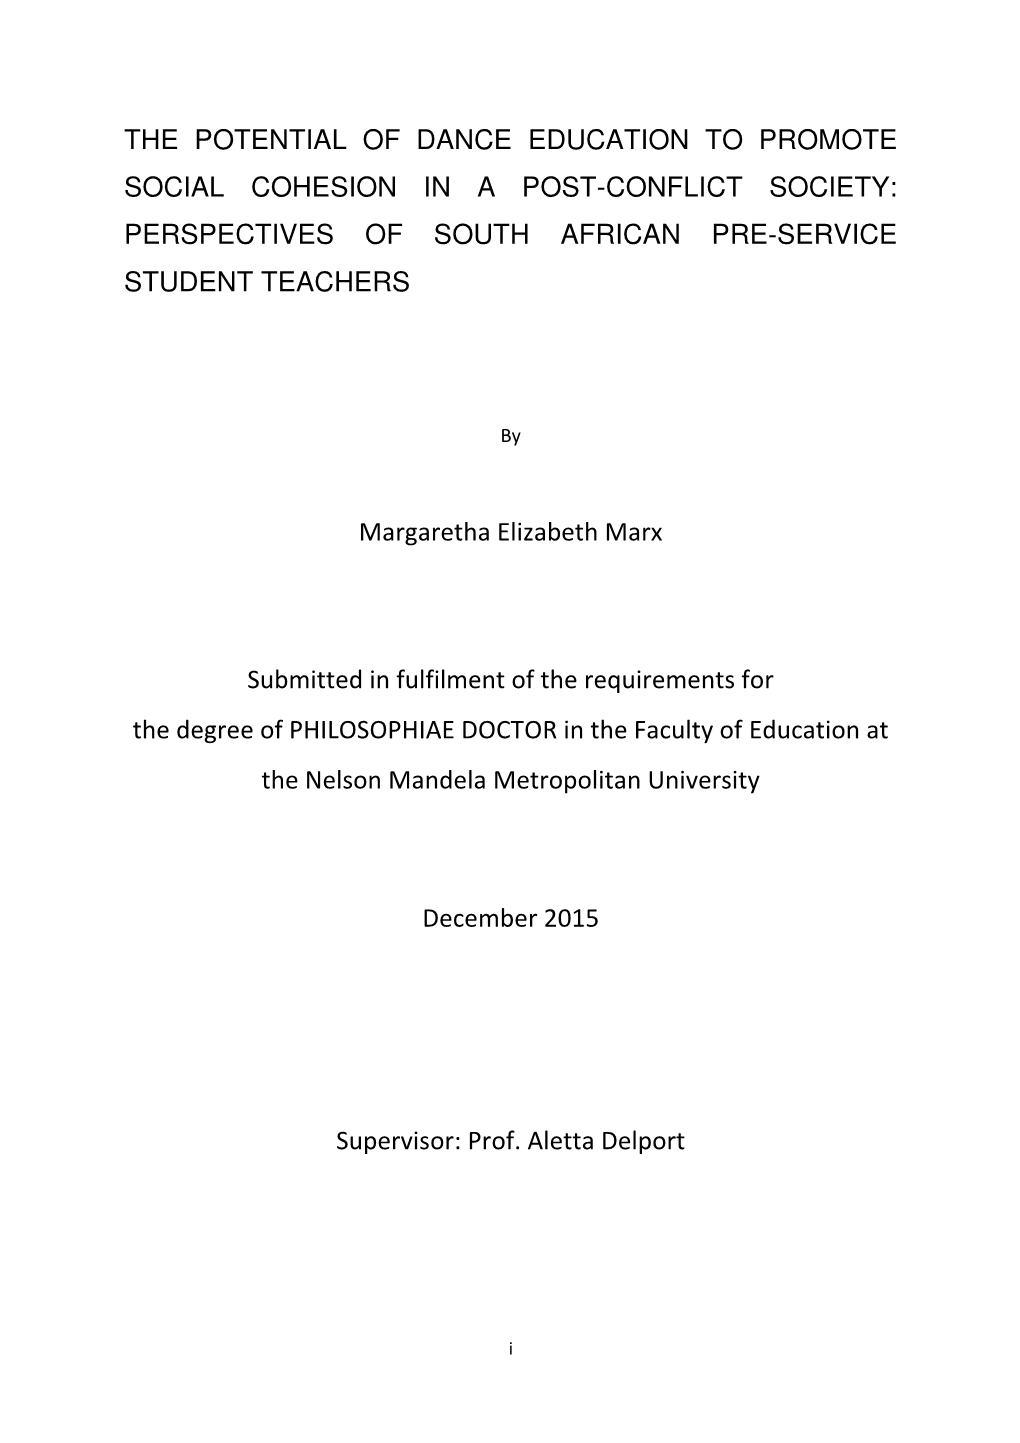 The Potential of Dance Education to Promote Social Cohesion in a Post-Conflict Society: Perspectives of South African Pre-Service Student Teachers